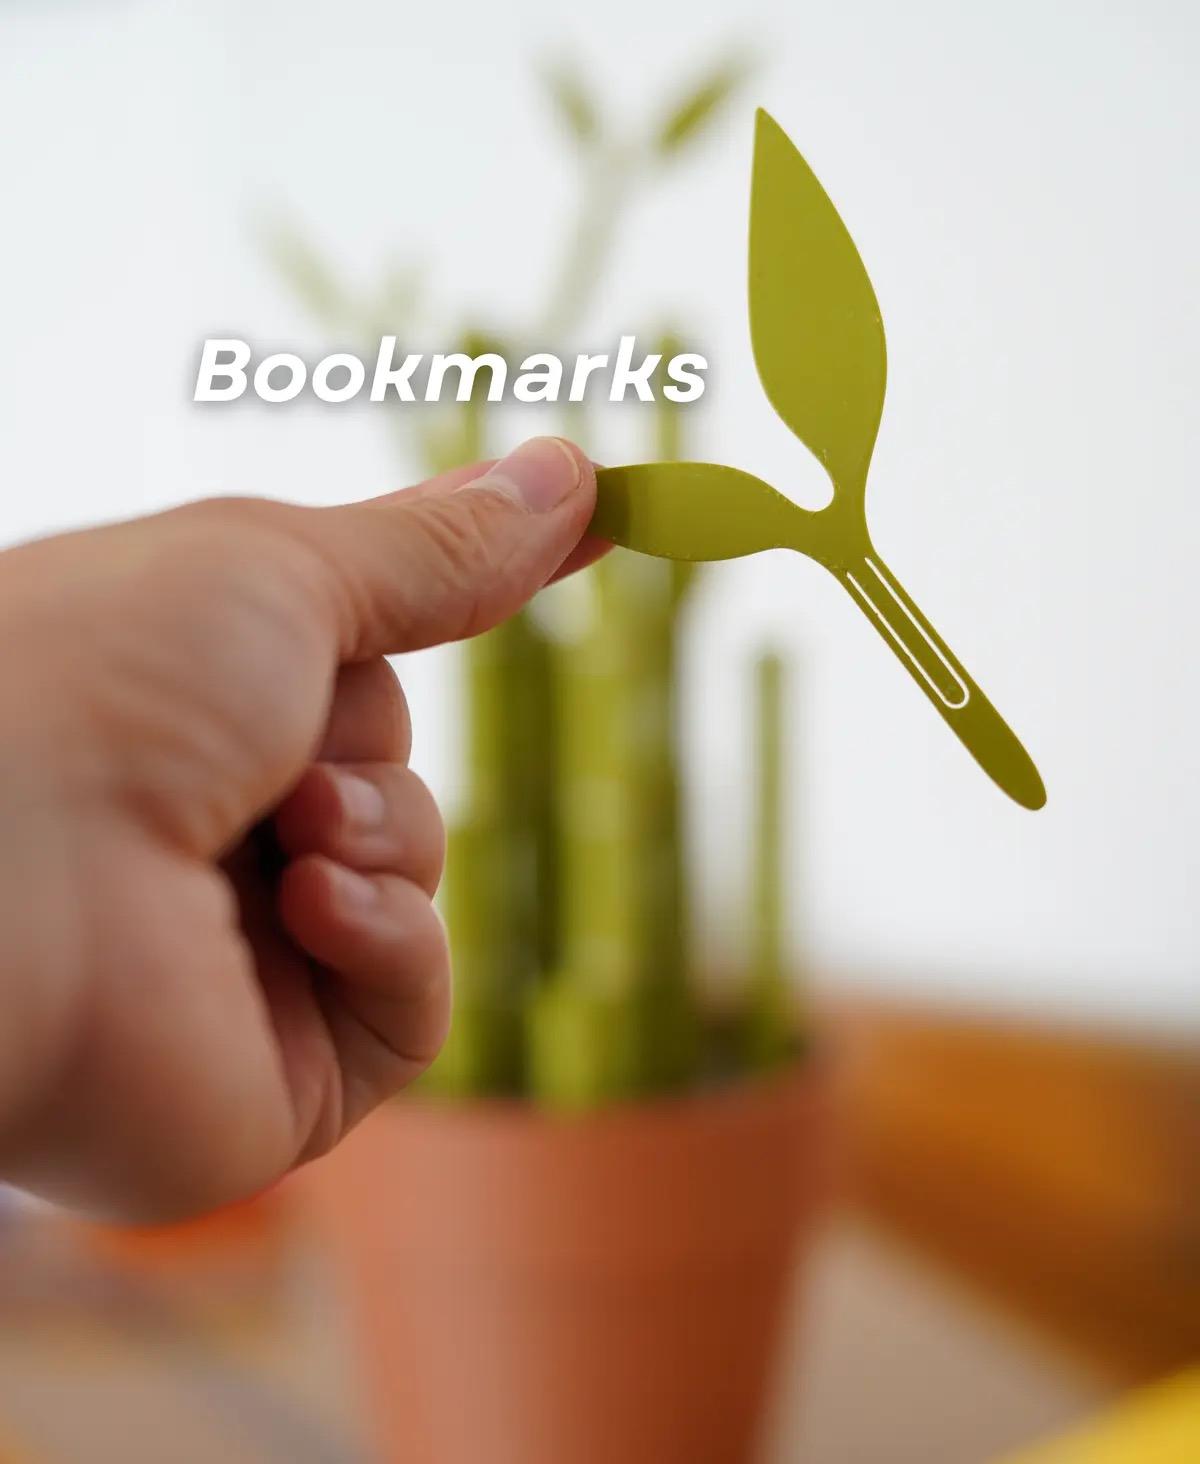 BAMBOOKENDS: 5 in 1 Functional Plant by elleSTVDIO 3d model